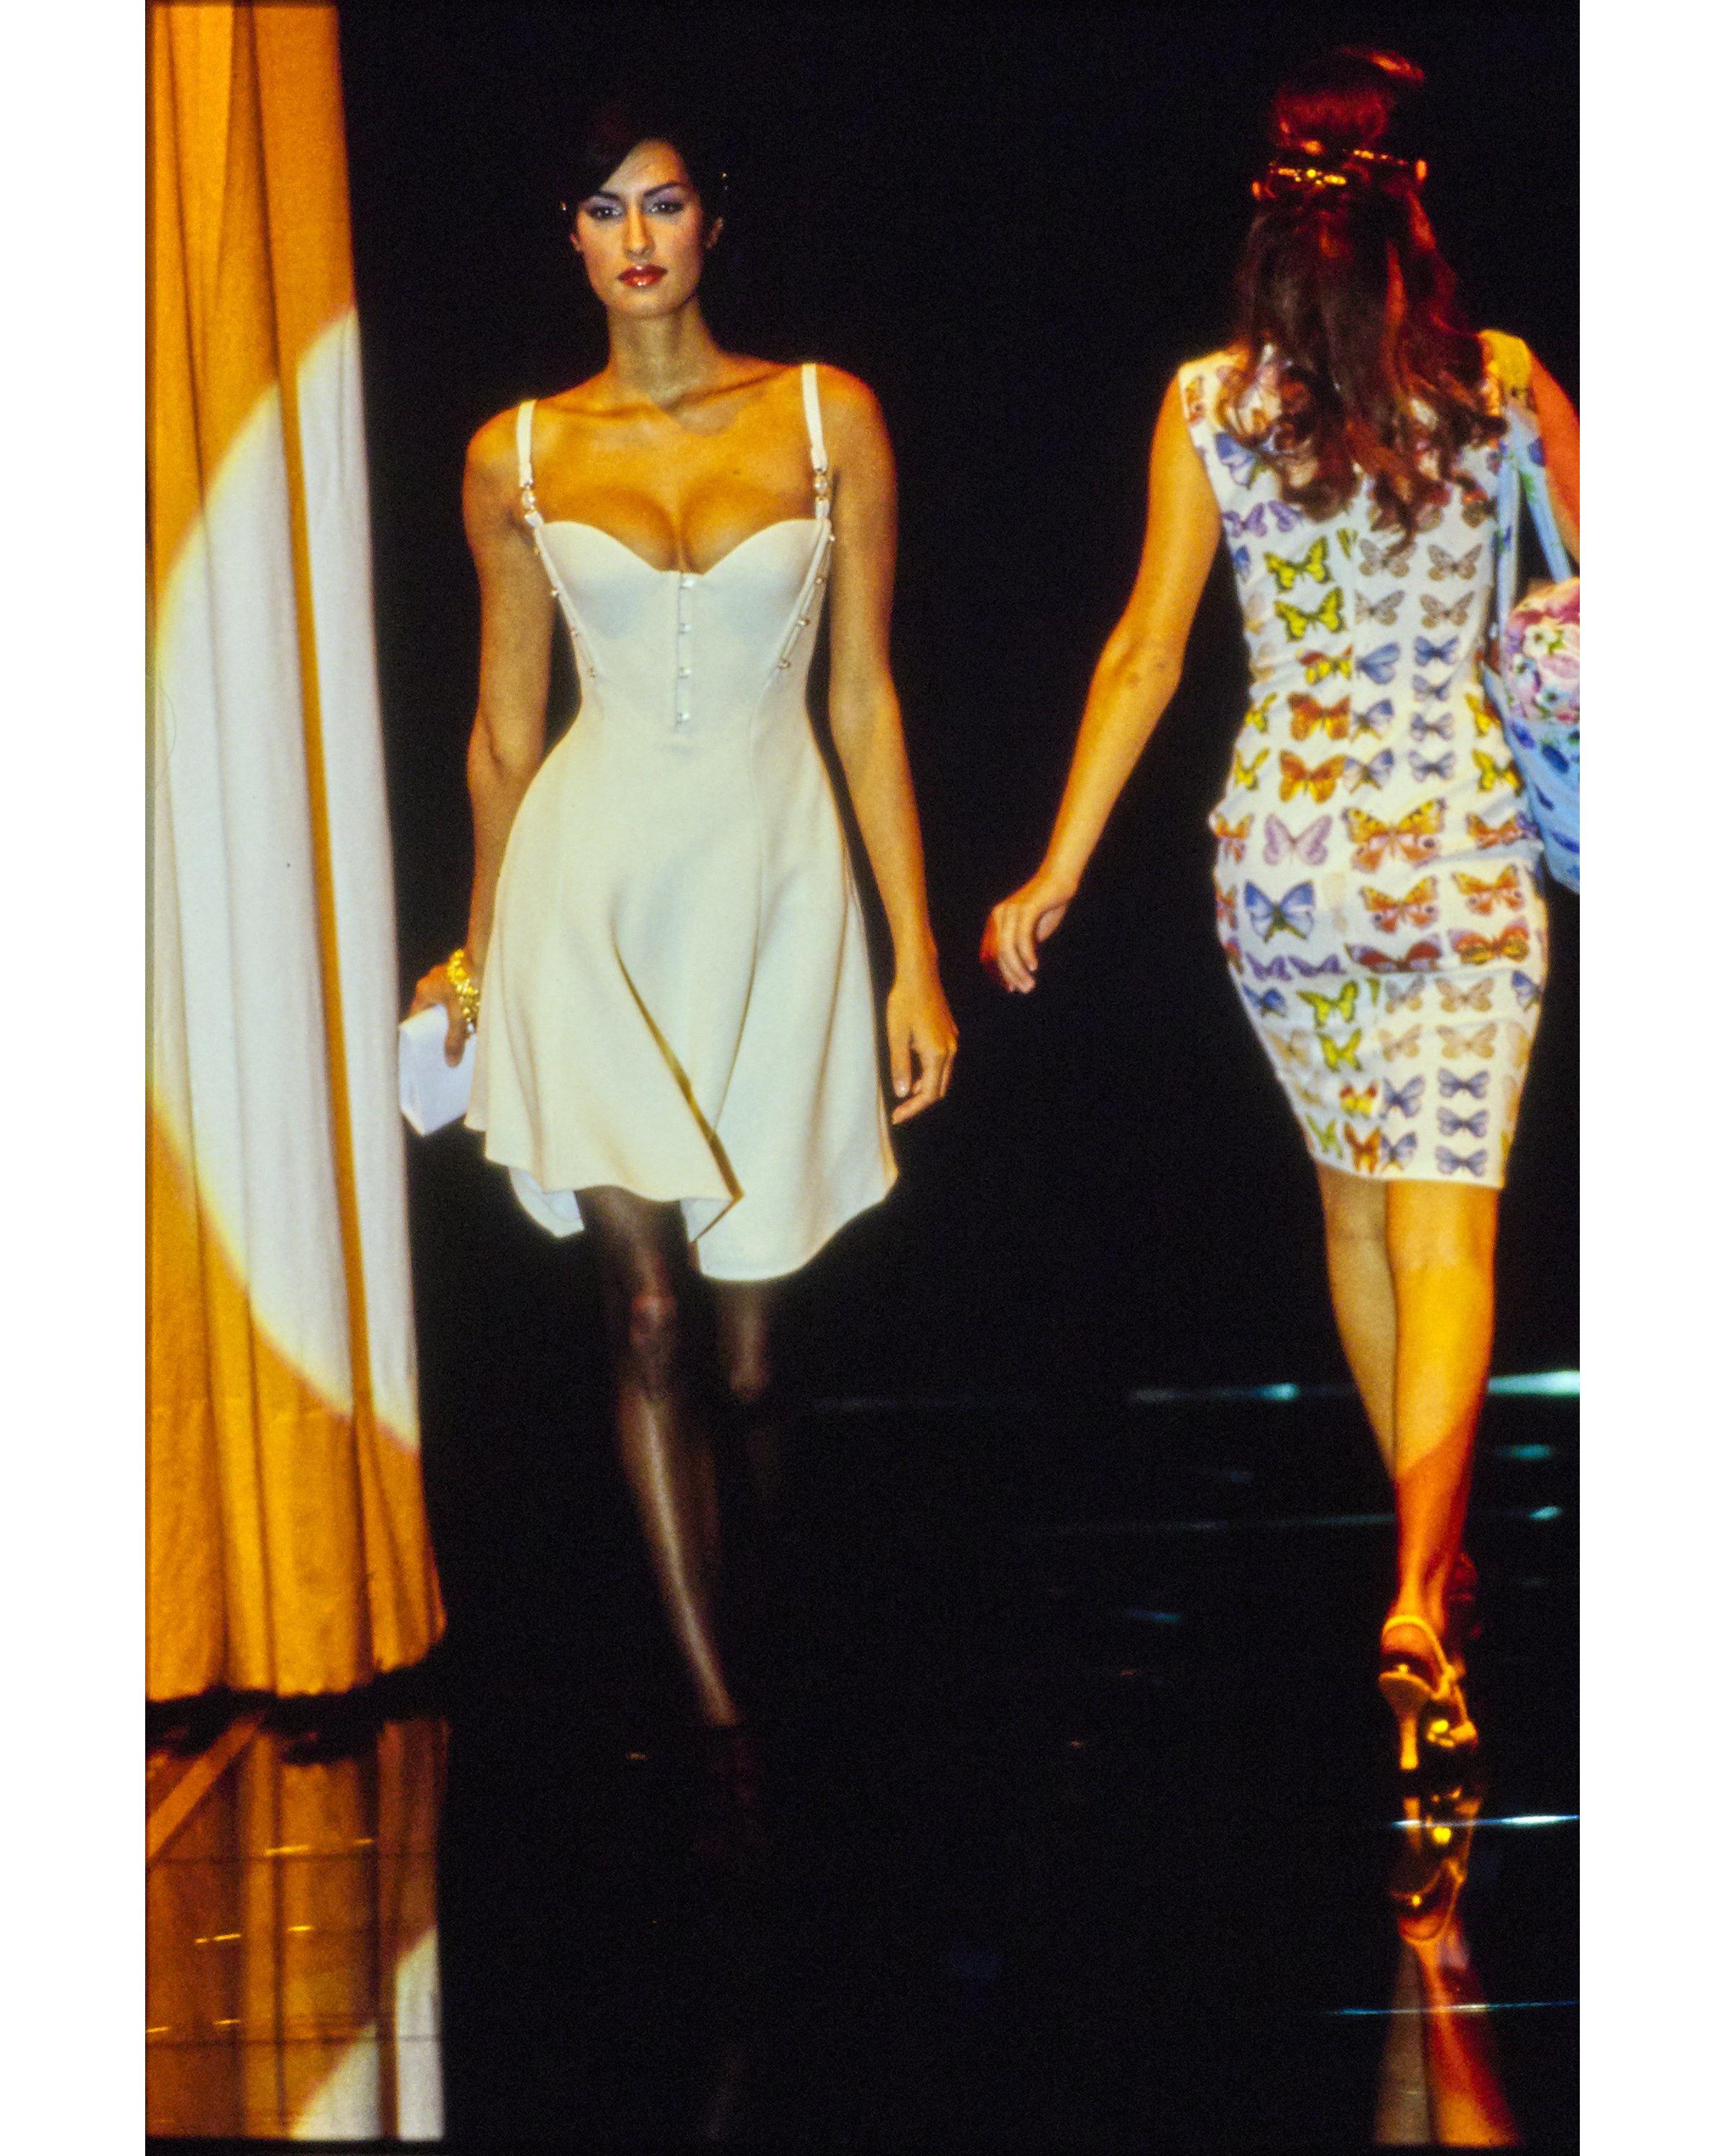 S/S 1995 Gianni Versace cream mini dress with signature Medusa head straps. Sleeveless dress with fitted bodice and flared A-line skirt, featuring bronze gold mini Medusa head closures at center front and sides. Built-in corset with boning and side